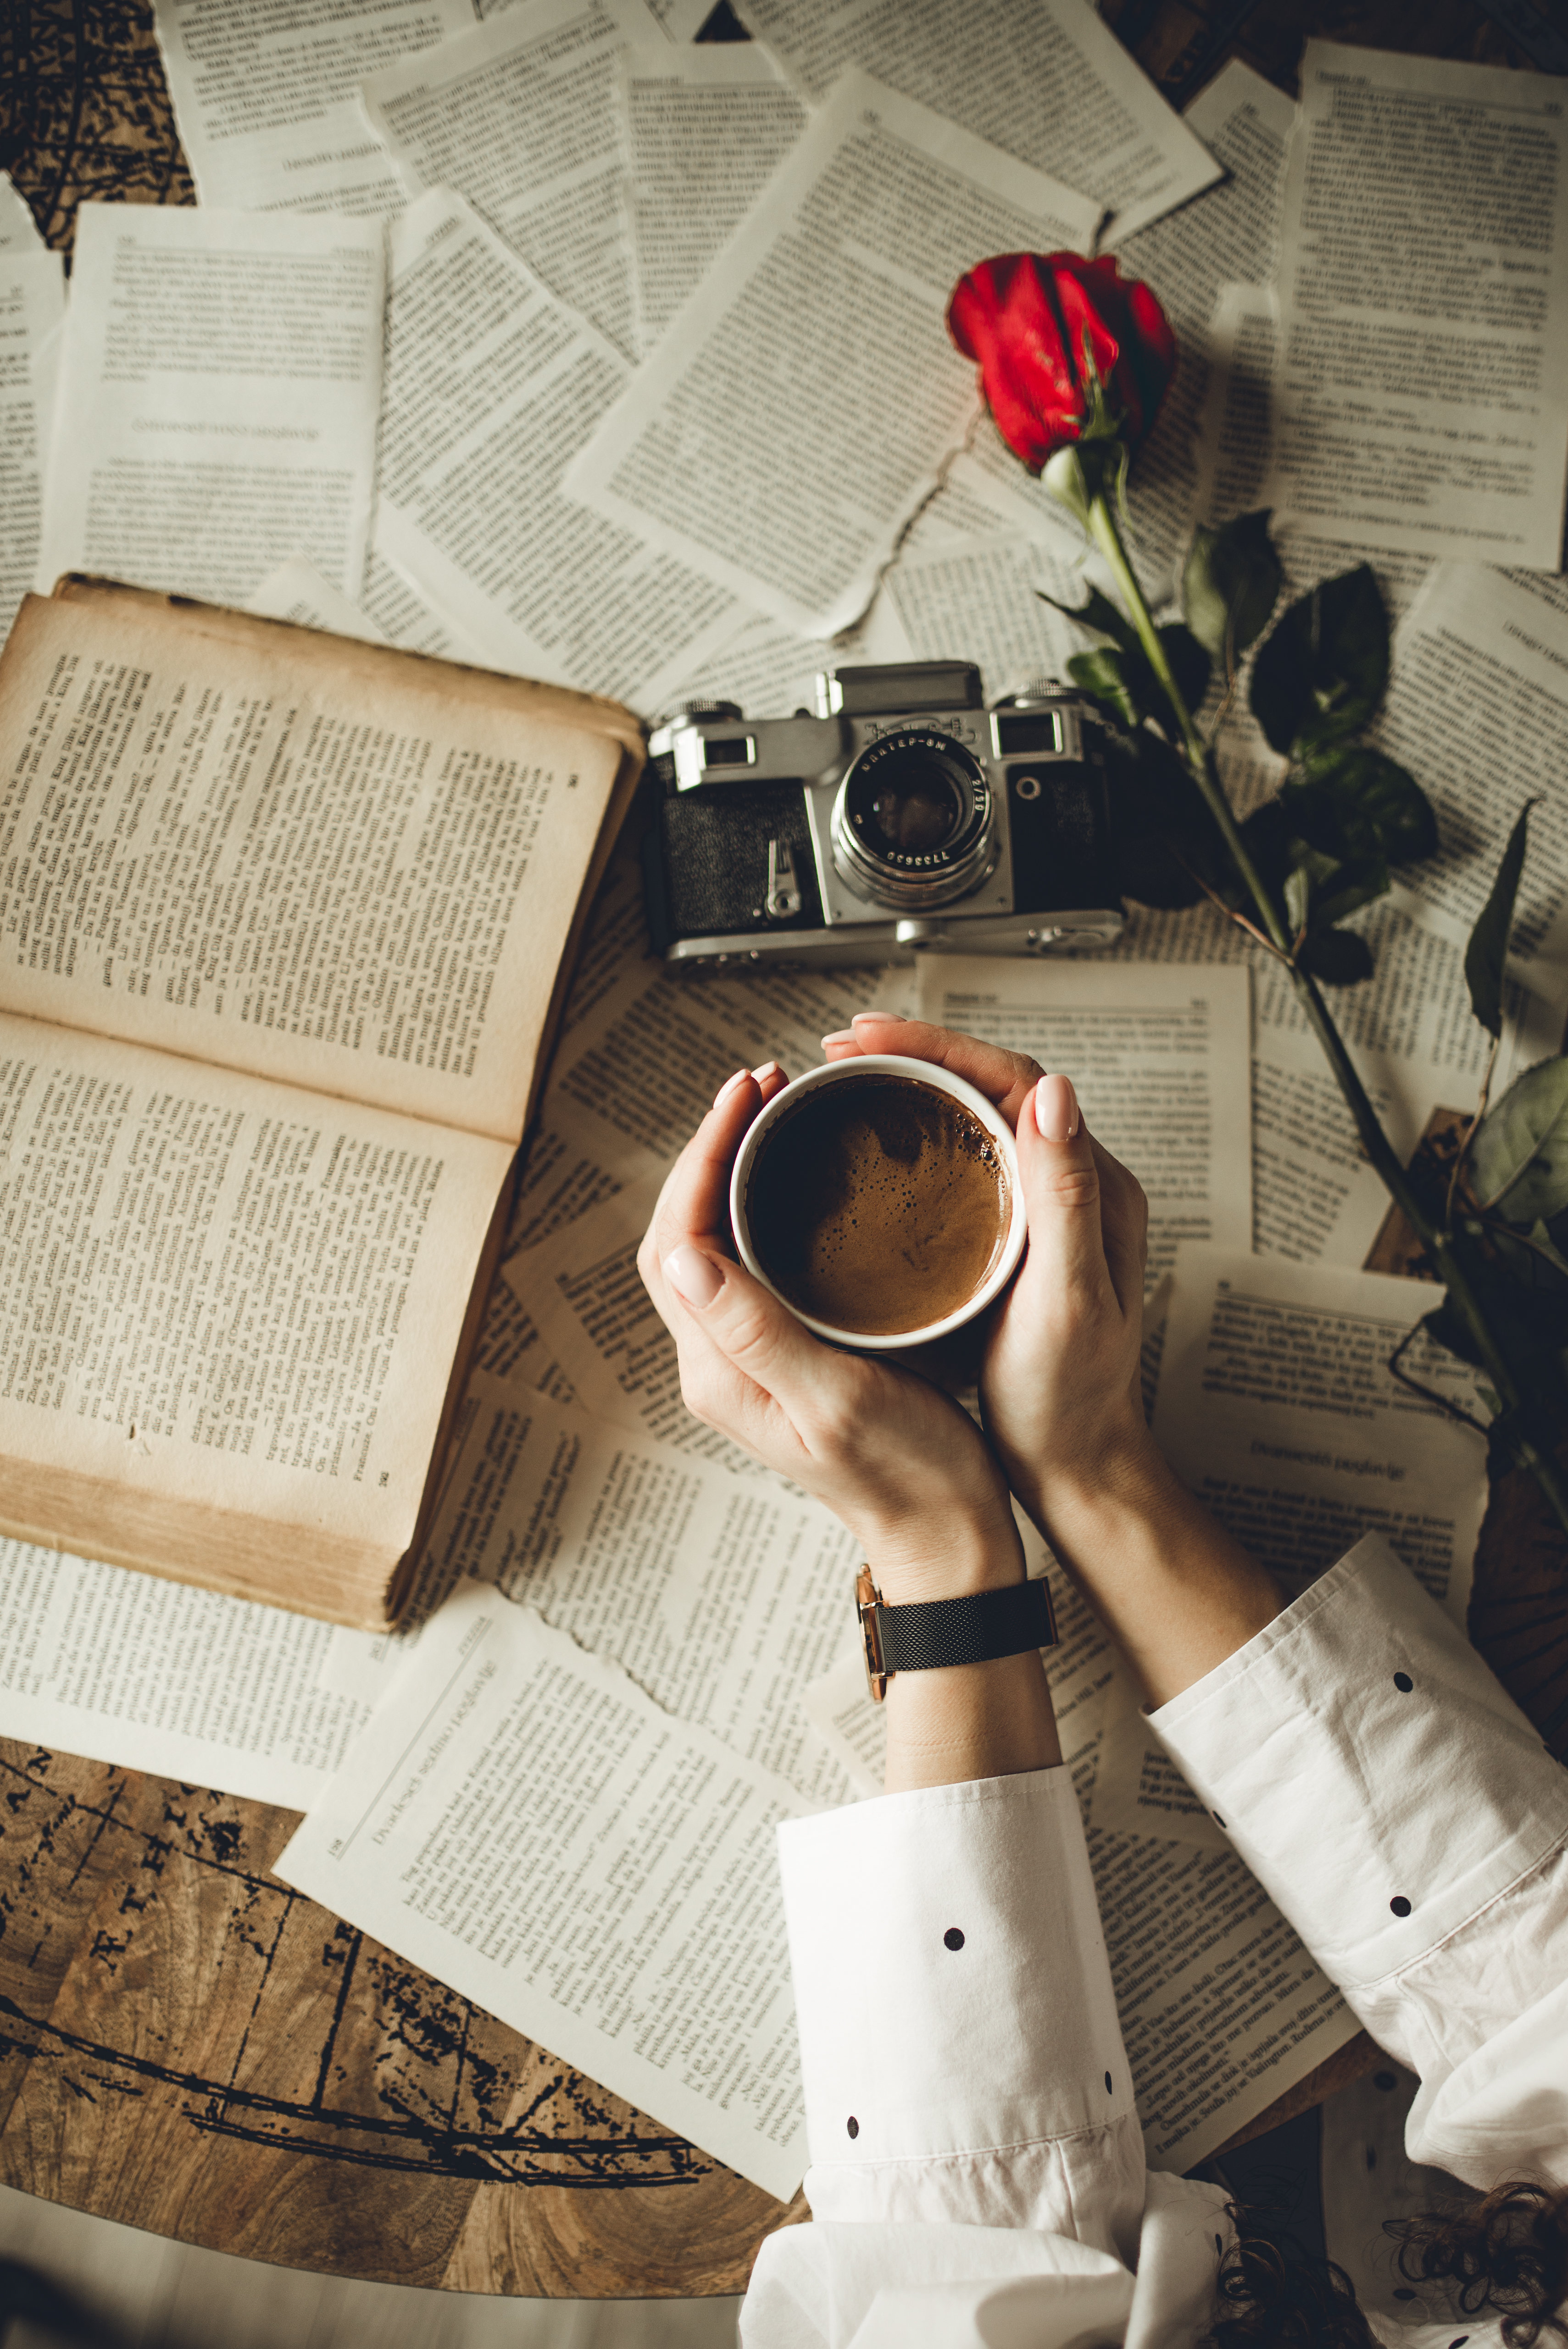 book, cup, flower, miscellanea, miscellaneous, hands, camera, pages, page